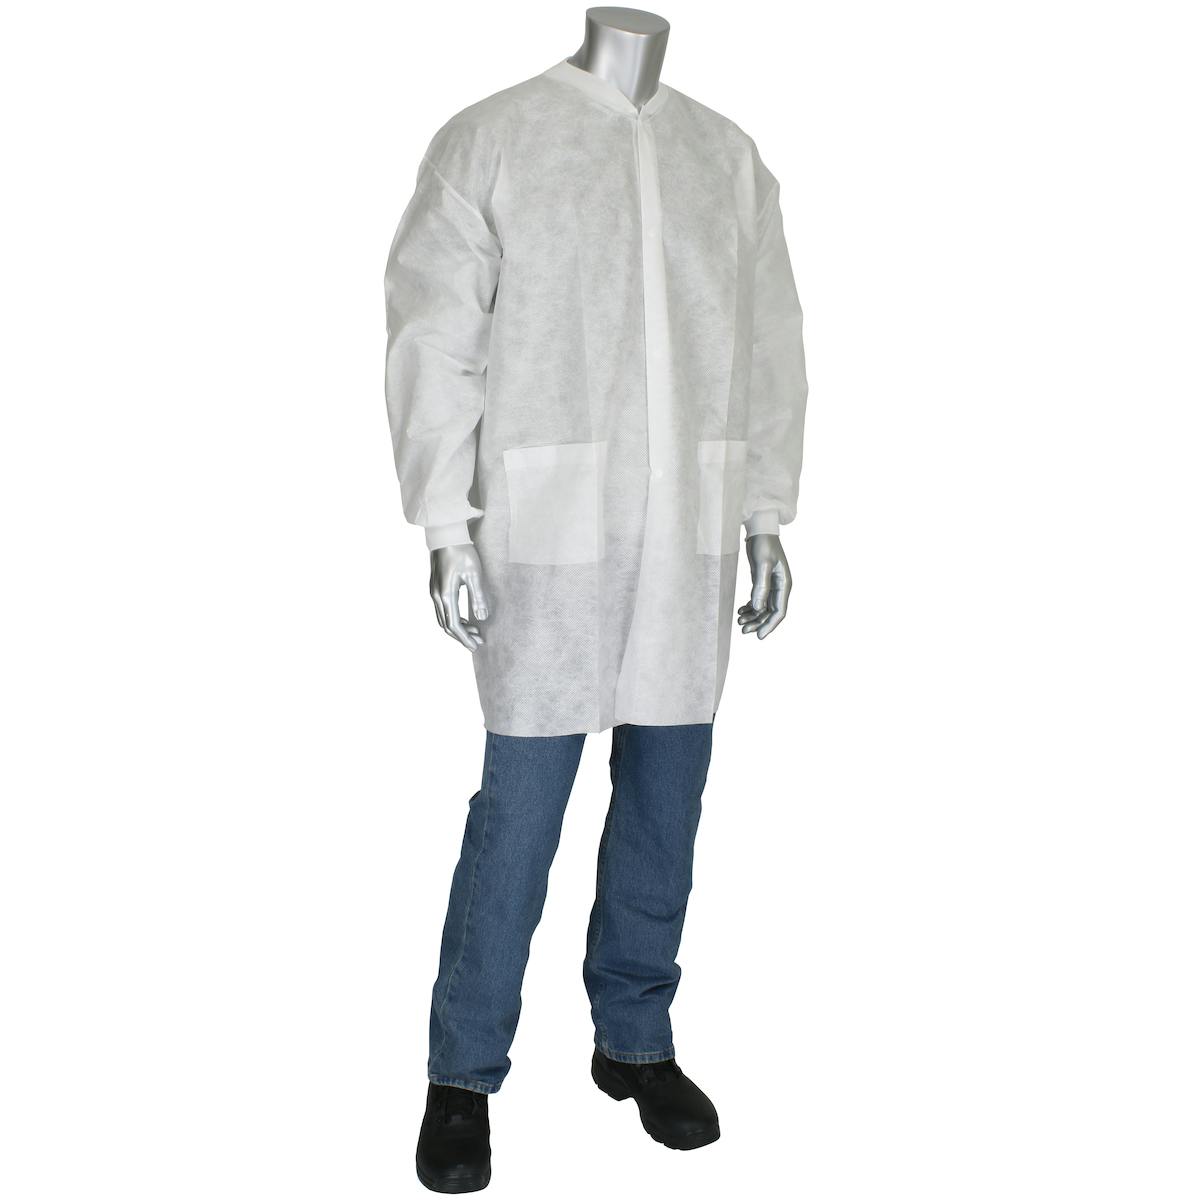 Standard Weight SBP Lab Coat - Two pockets 37 gsm, White (C3828)_0